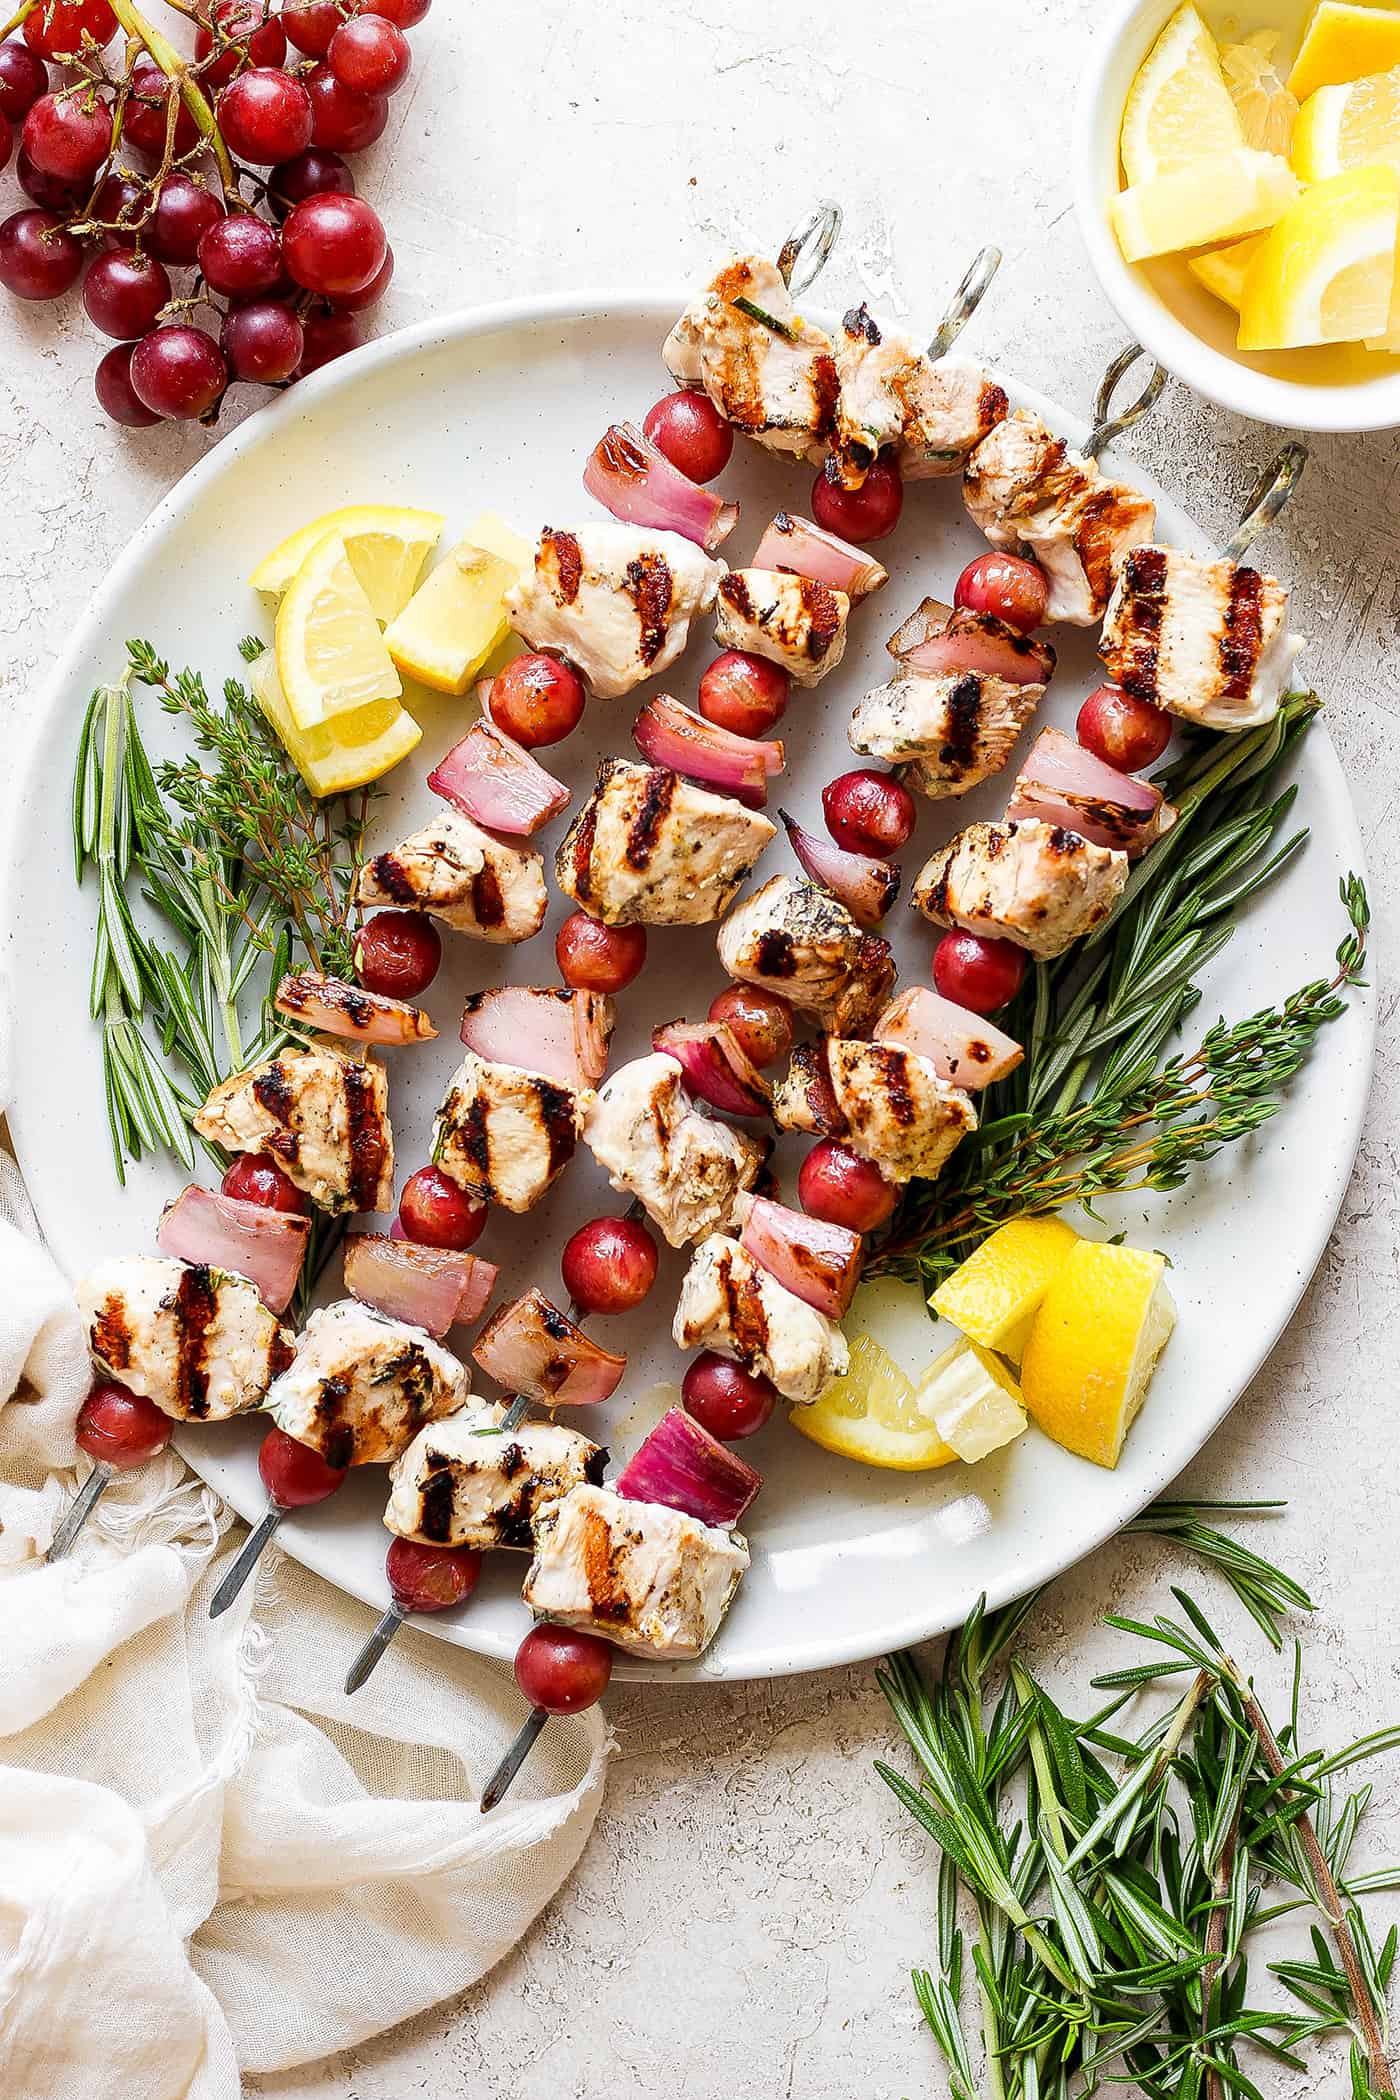 A white plate holds chicken kabobs with grapes on skewers with lemon next to them.